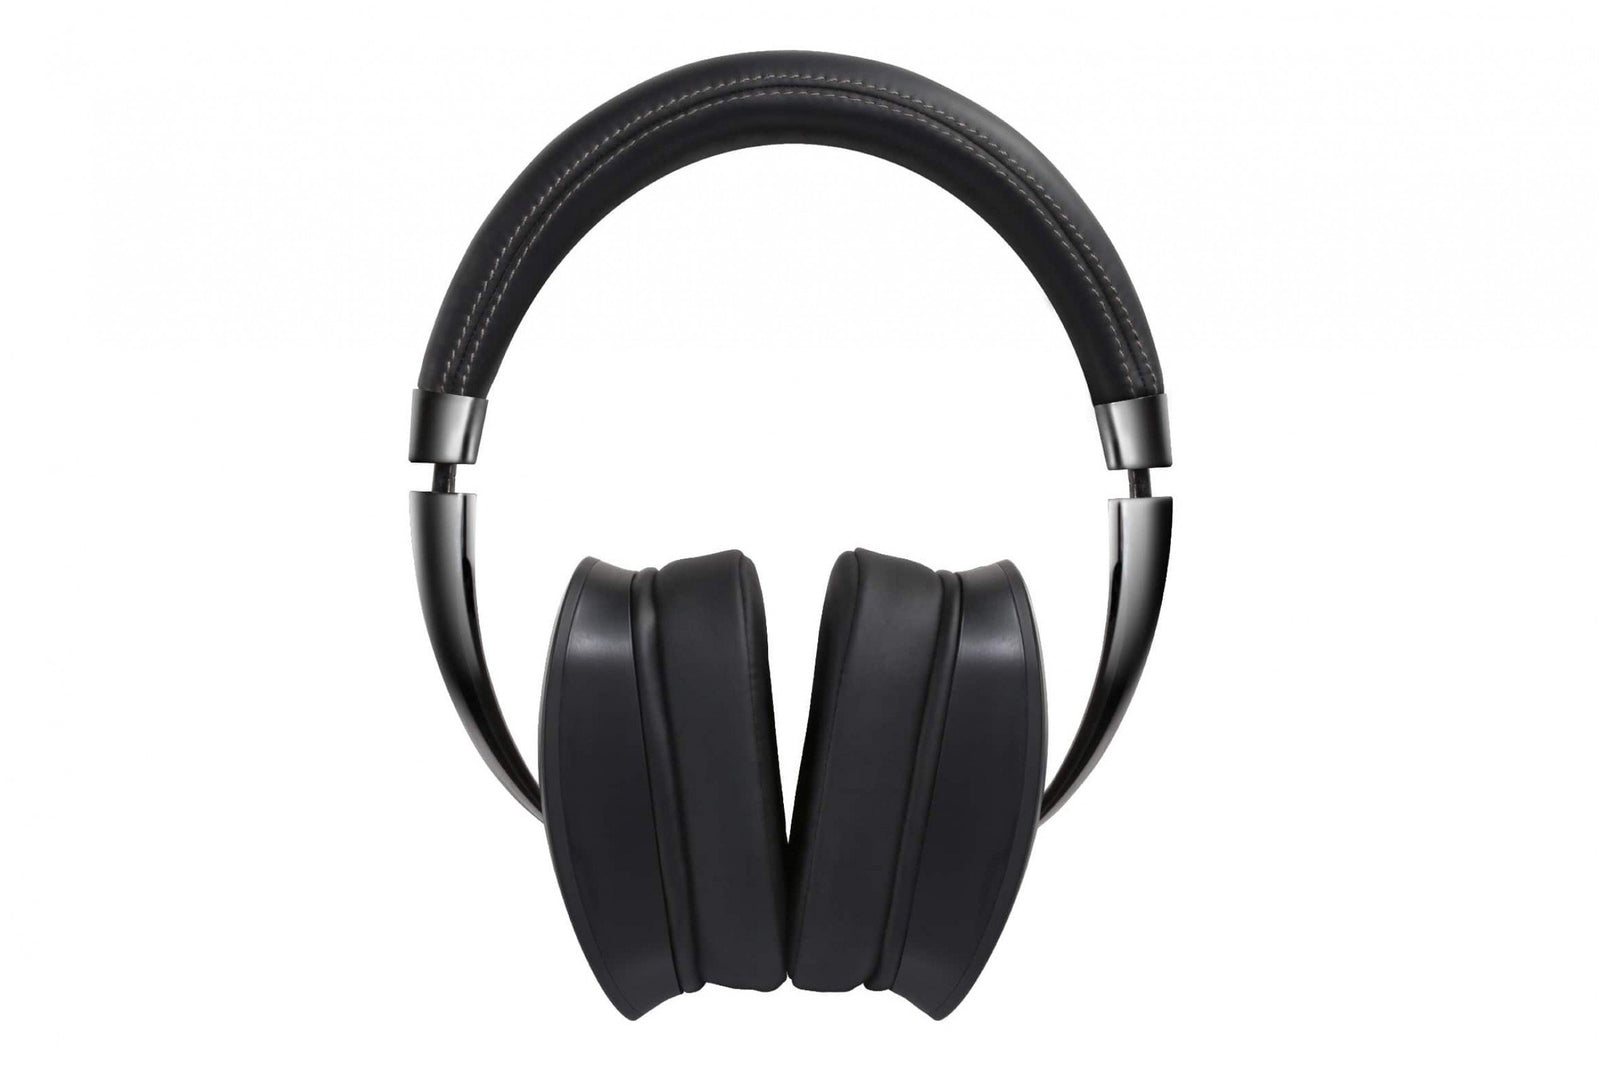 NAD VISO HP70 WIRELESS ANC HEADPHONE - Best price on all NAD Electronics High Performance Hi-Fi and Home Theatre at Vinyl Sound, music and hi-fi apps including AV receivers, Music Streamers, Amplifiers models C 399 - C 700 - M10 V2 - C 316BEE V2 - C 368 - D 3045..., NAD Electronics Audio/Video components for Home Theatre products, Integrated Amplifiers C 700 NEW BluOS Streaming Amplifiers, NAD Electronics Masters Series…